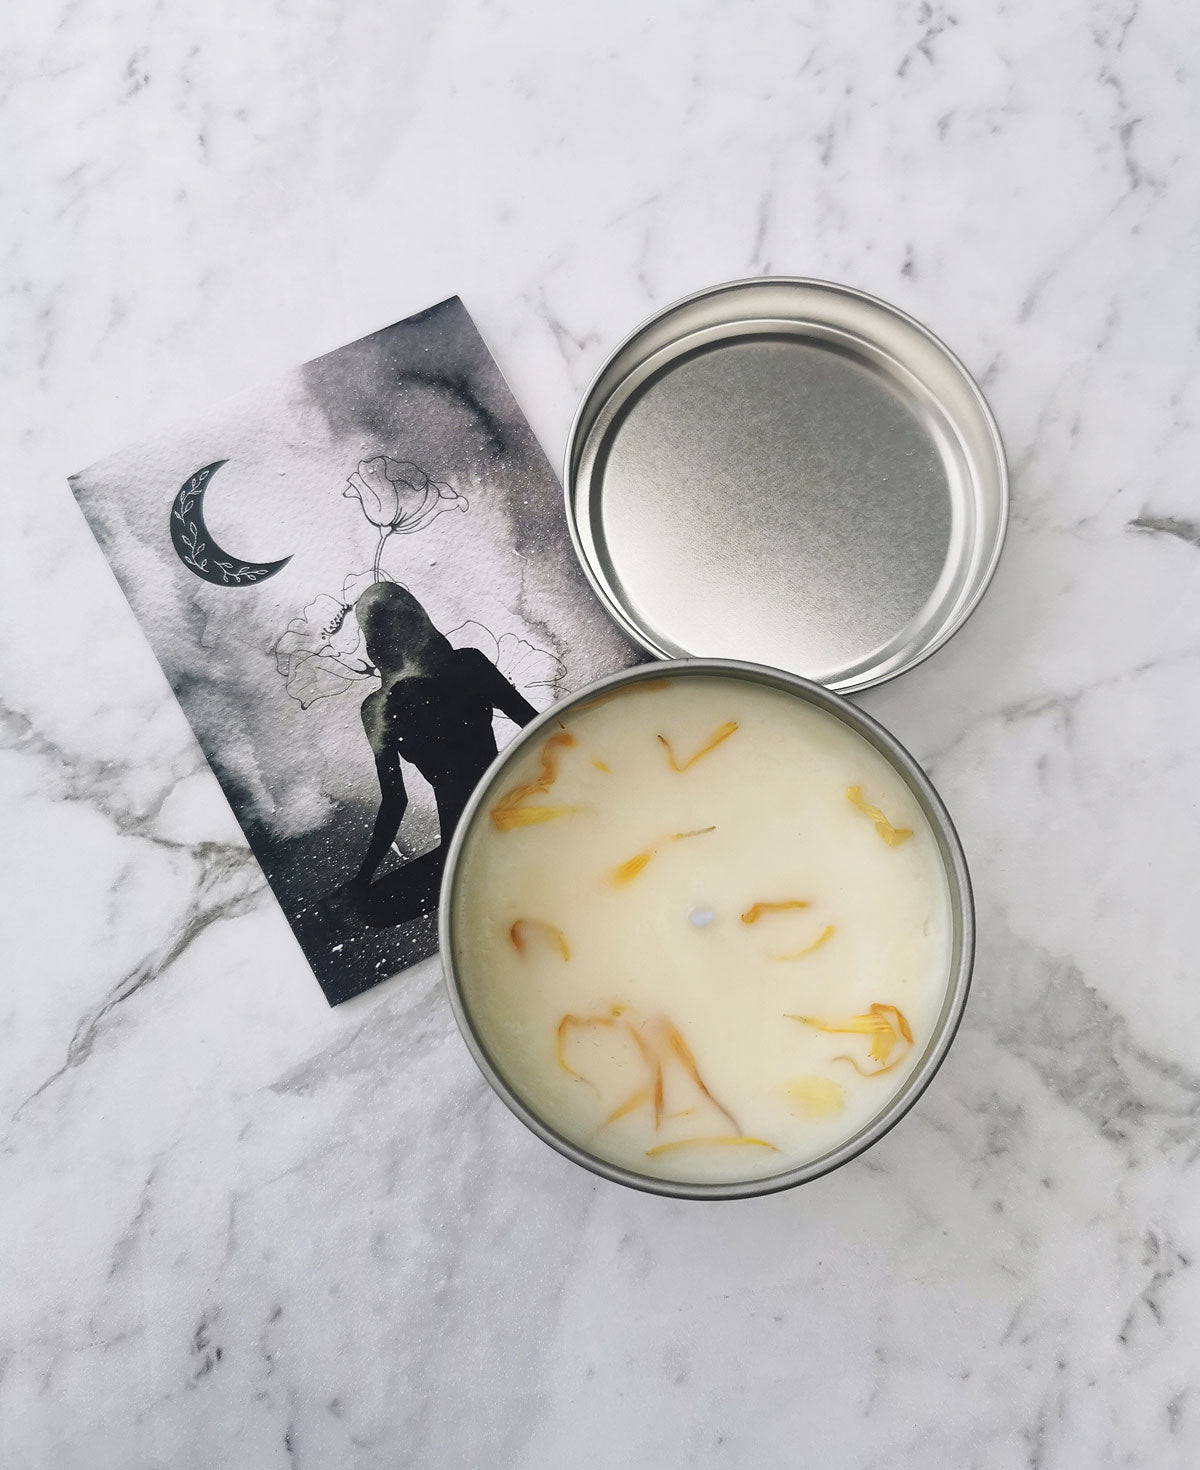 Prosperity & Abundance - Wellbeing Healing candle - Crystal and Light Co